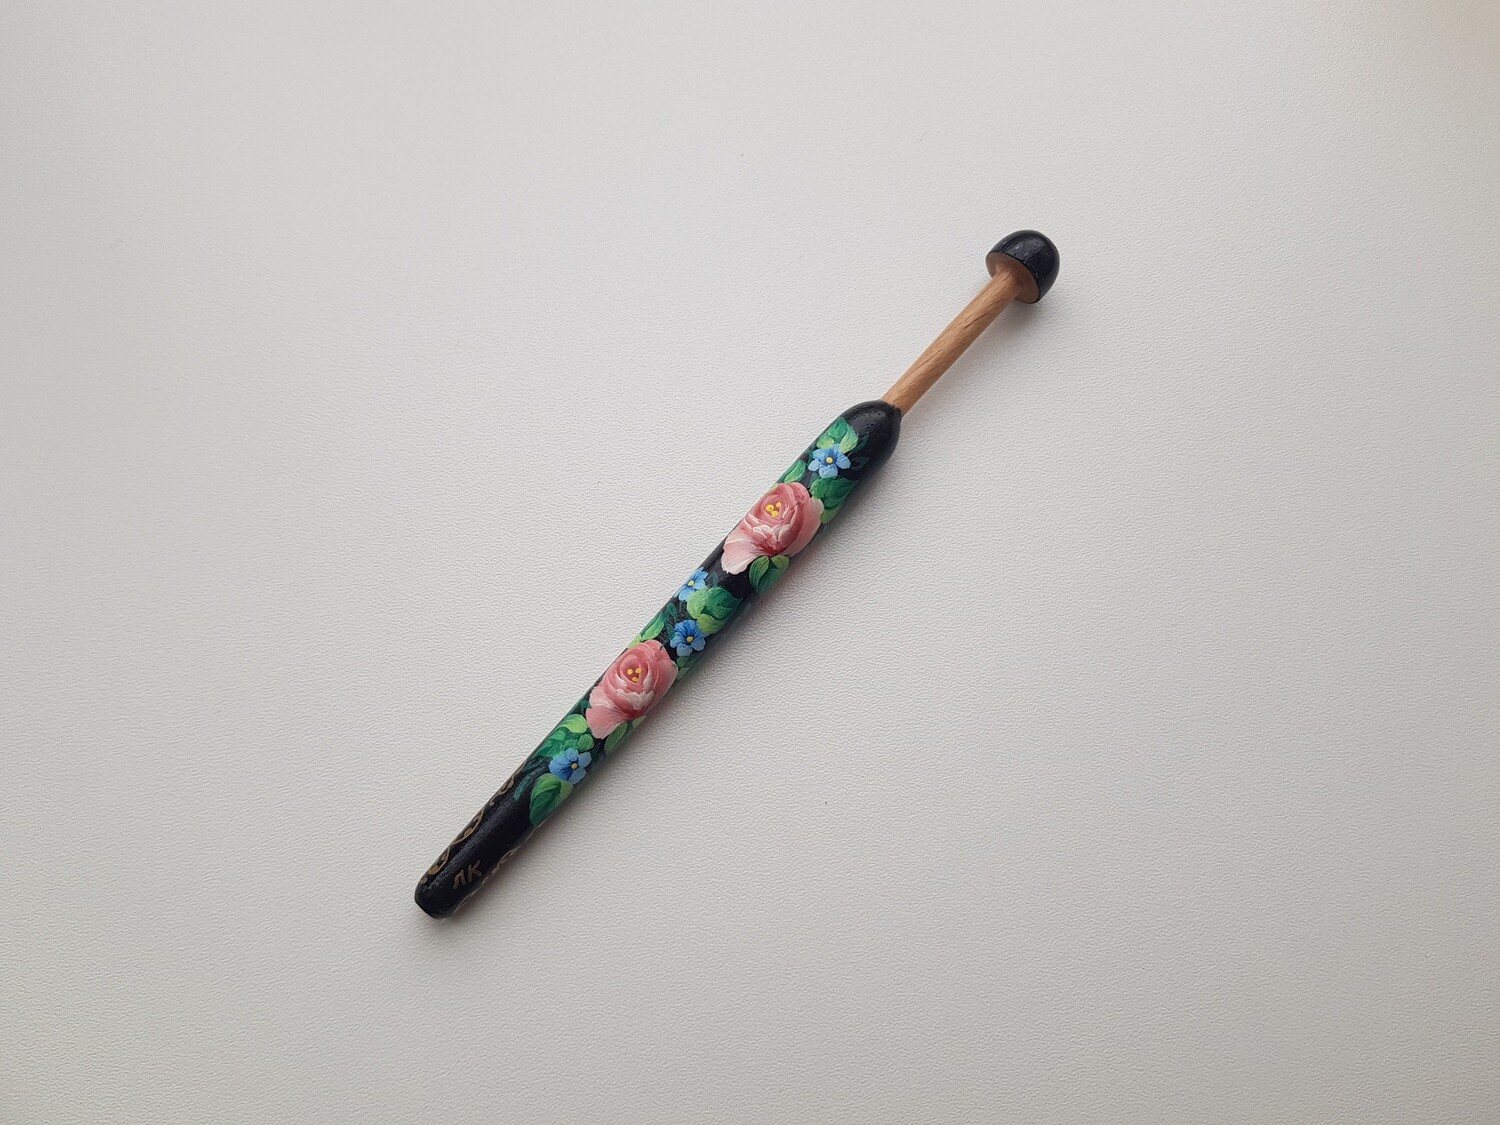 Straight Lacemaking Bobbin Beech Hand Made Painted BLACK AND PINK ROSES